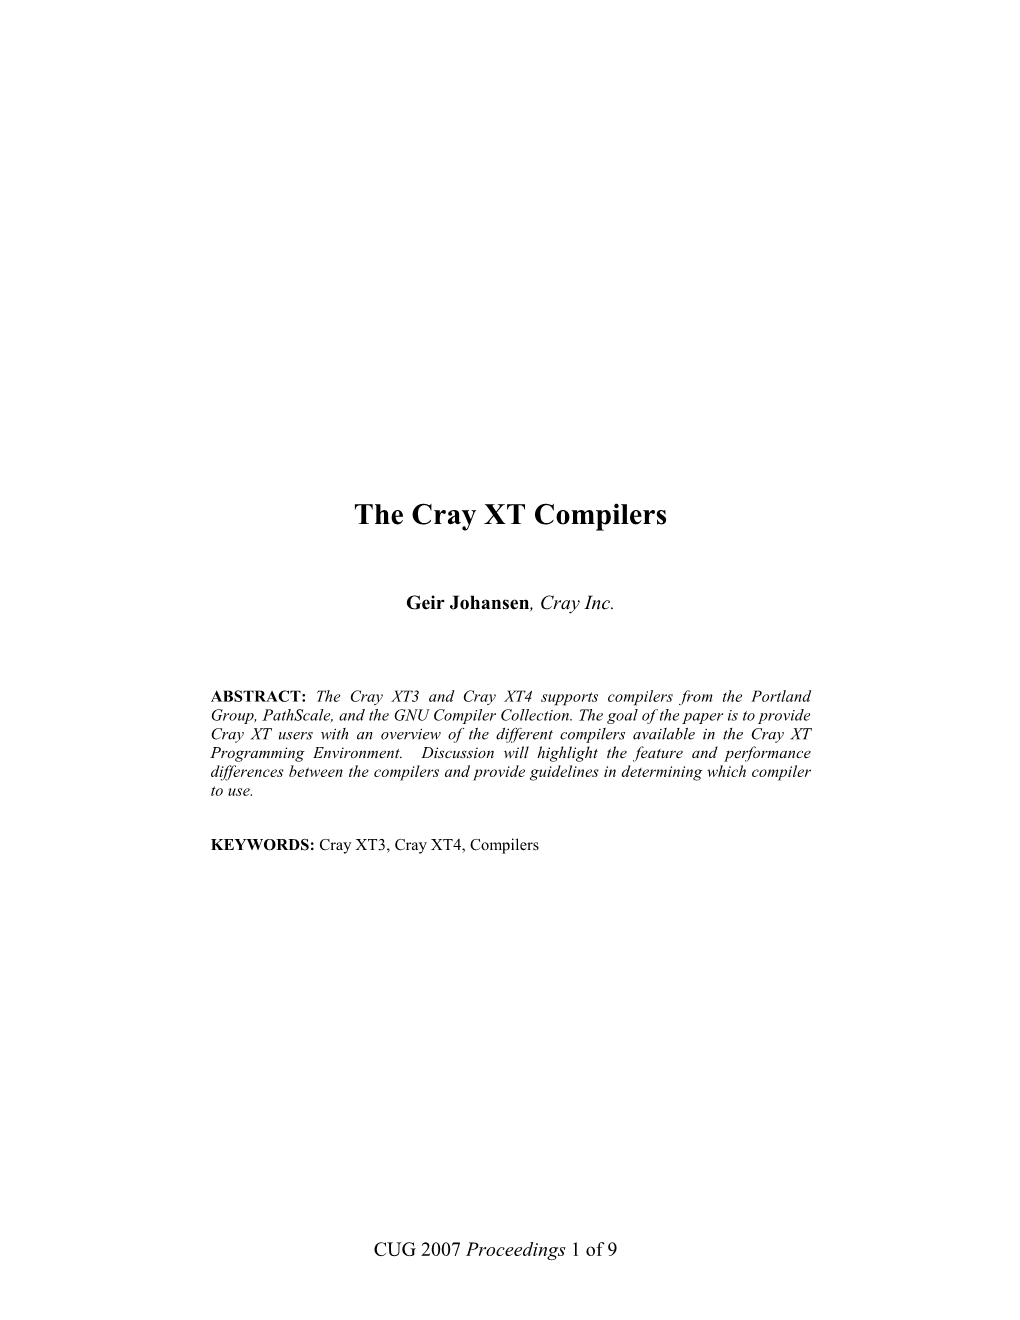 The Cray XT Compilers